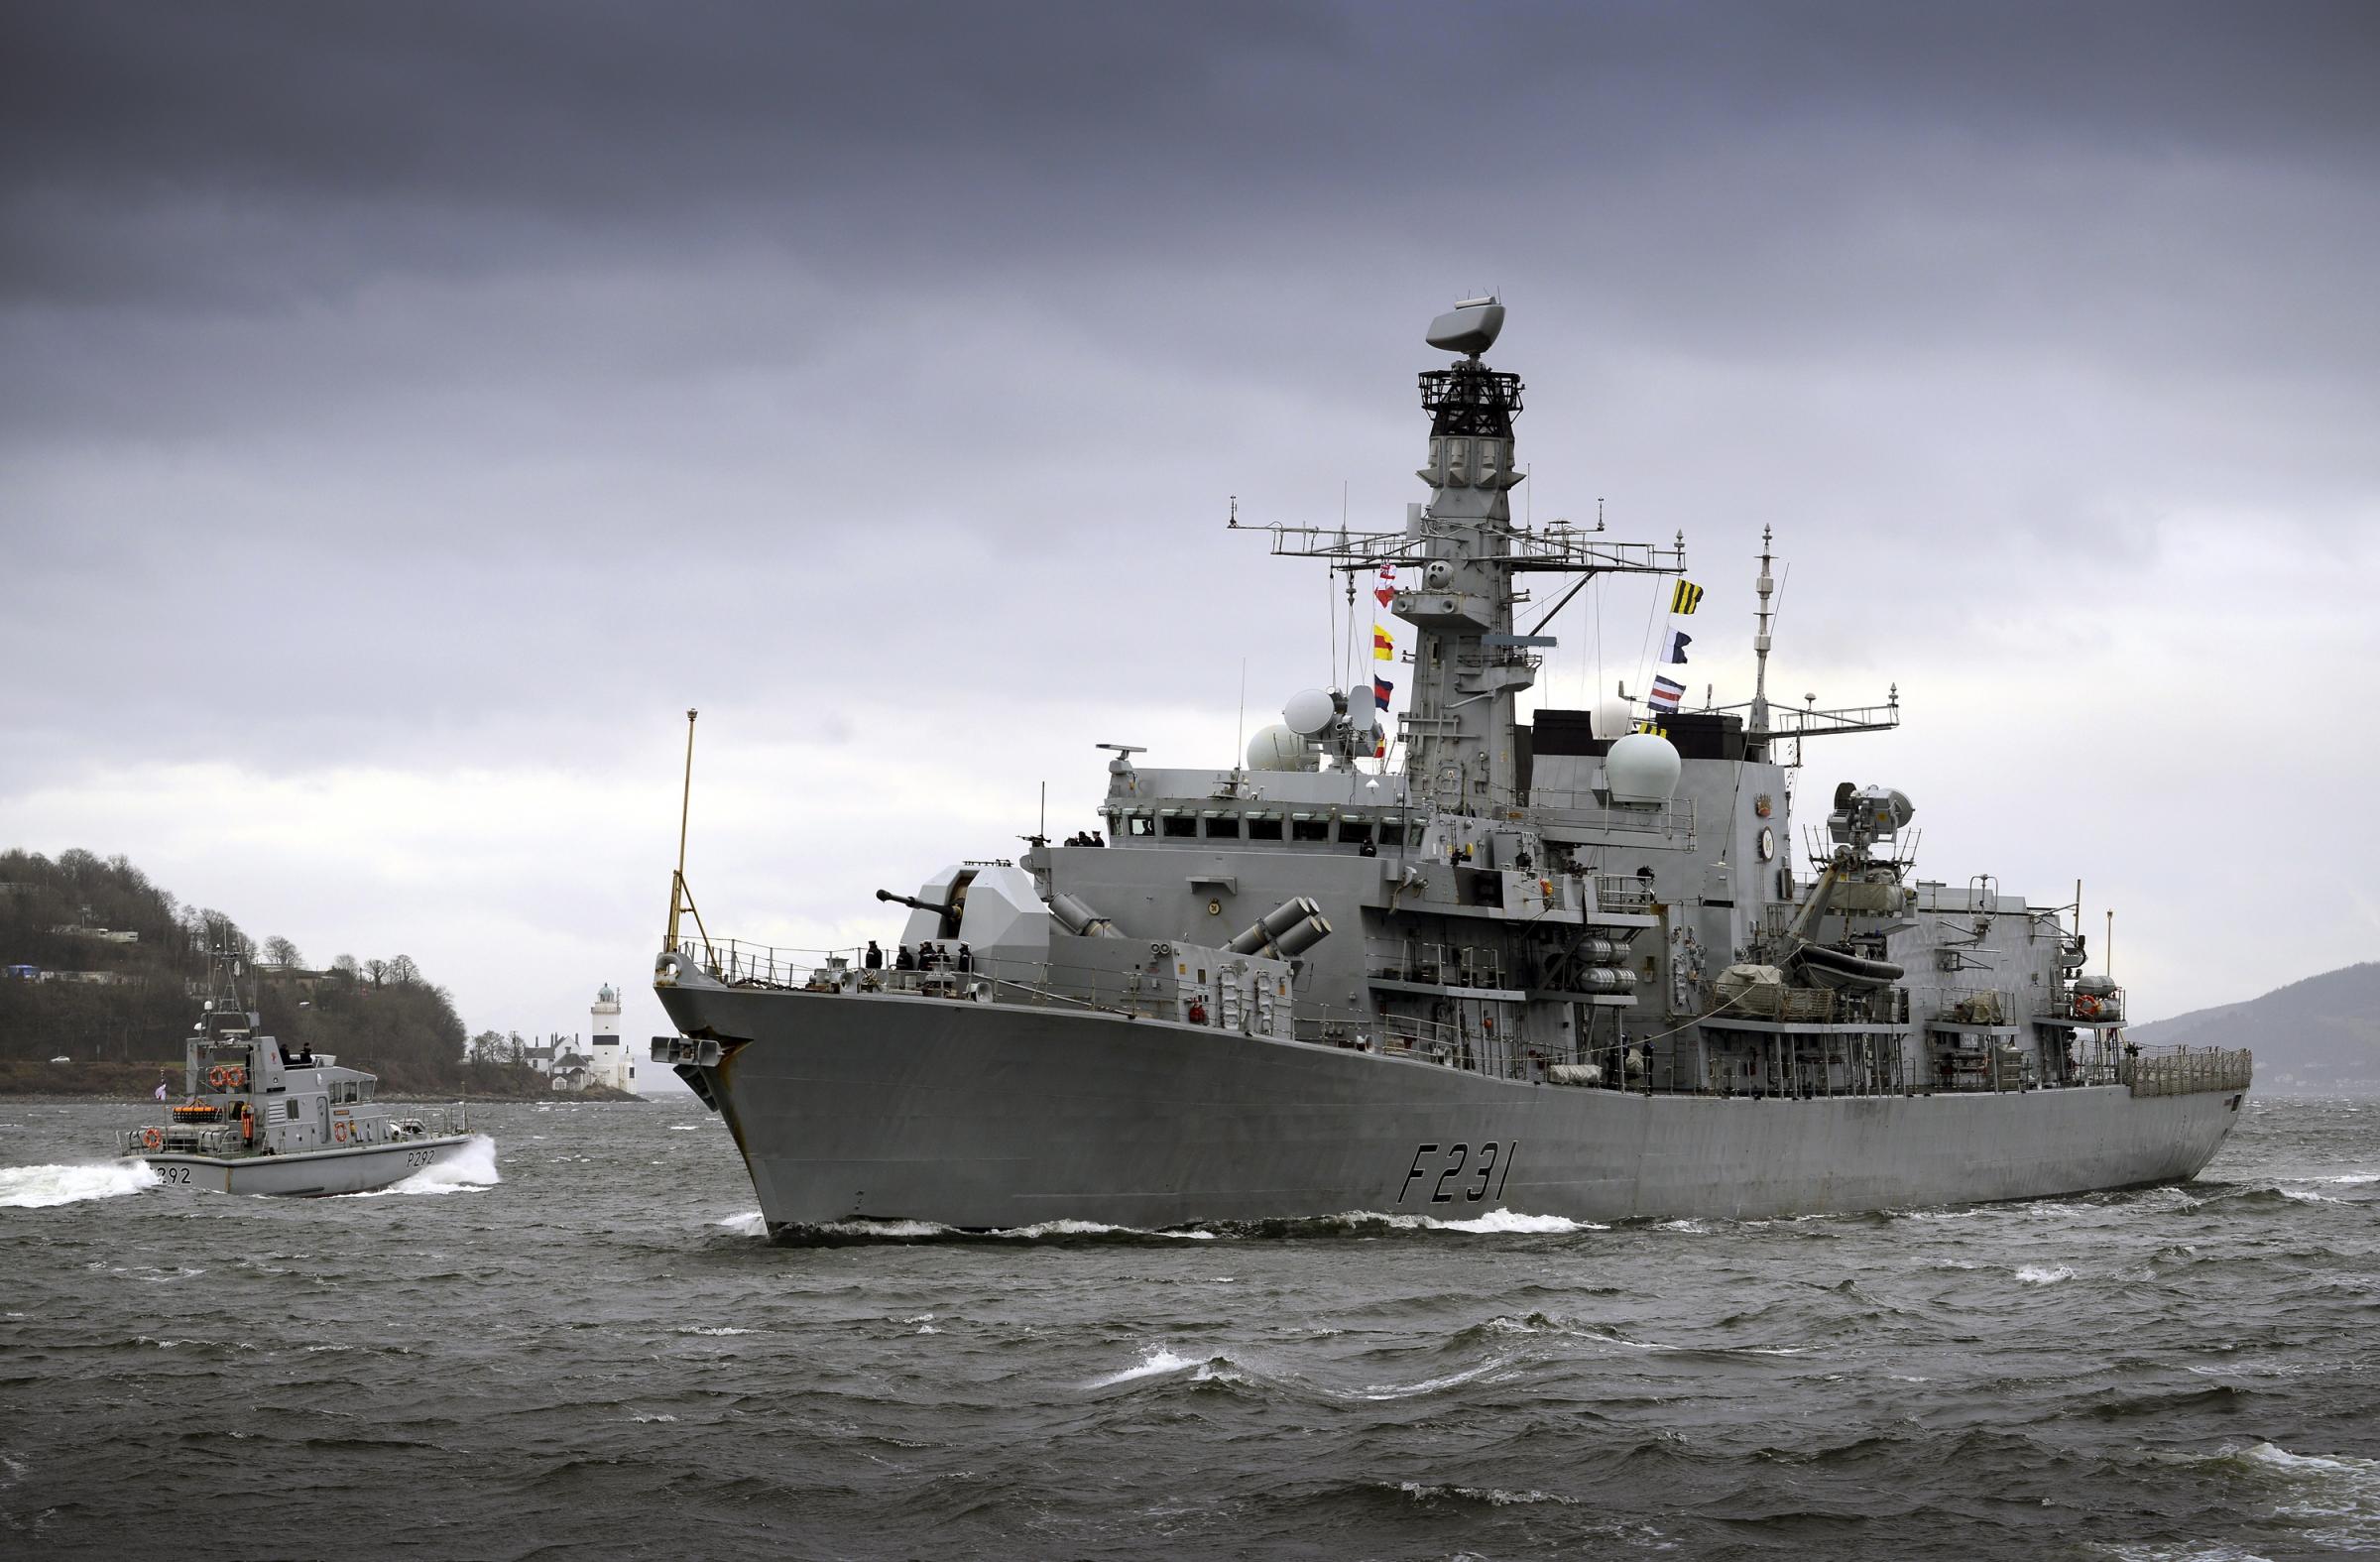 Naval ships from 10 NATO fleets and one non-NATO will take part in the exercise